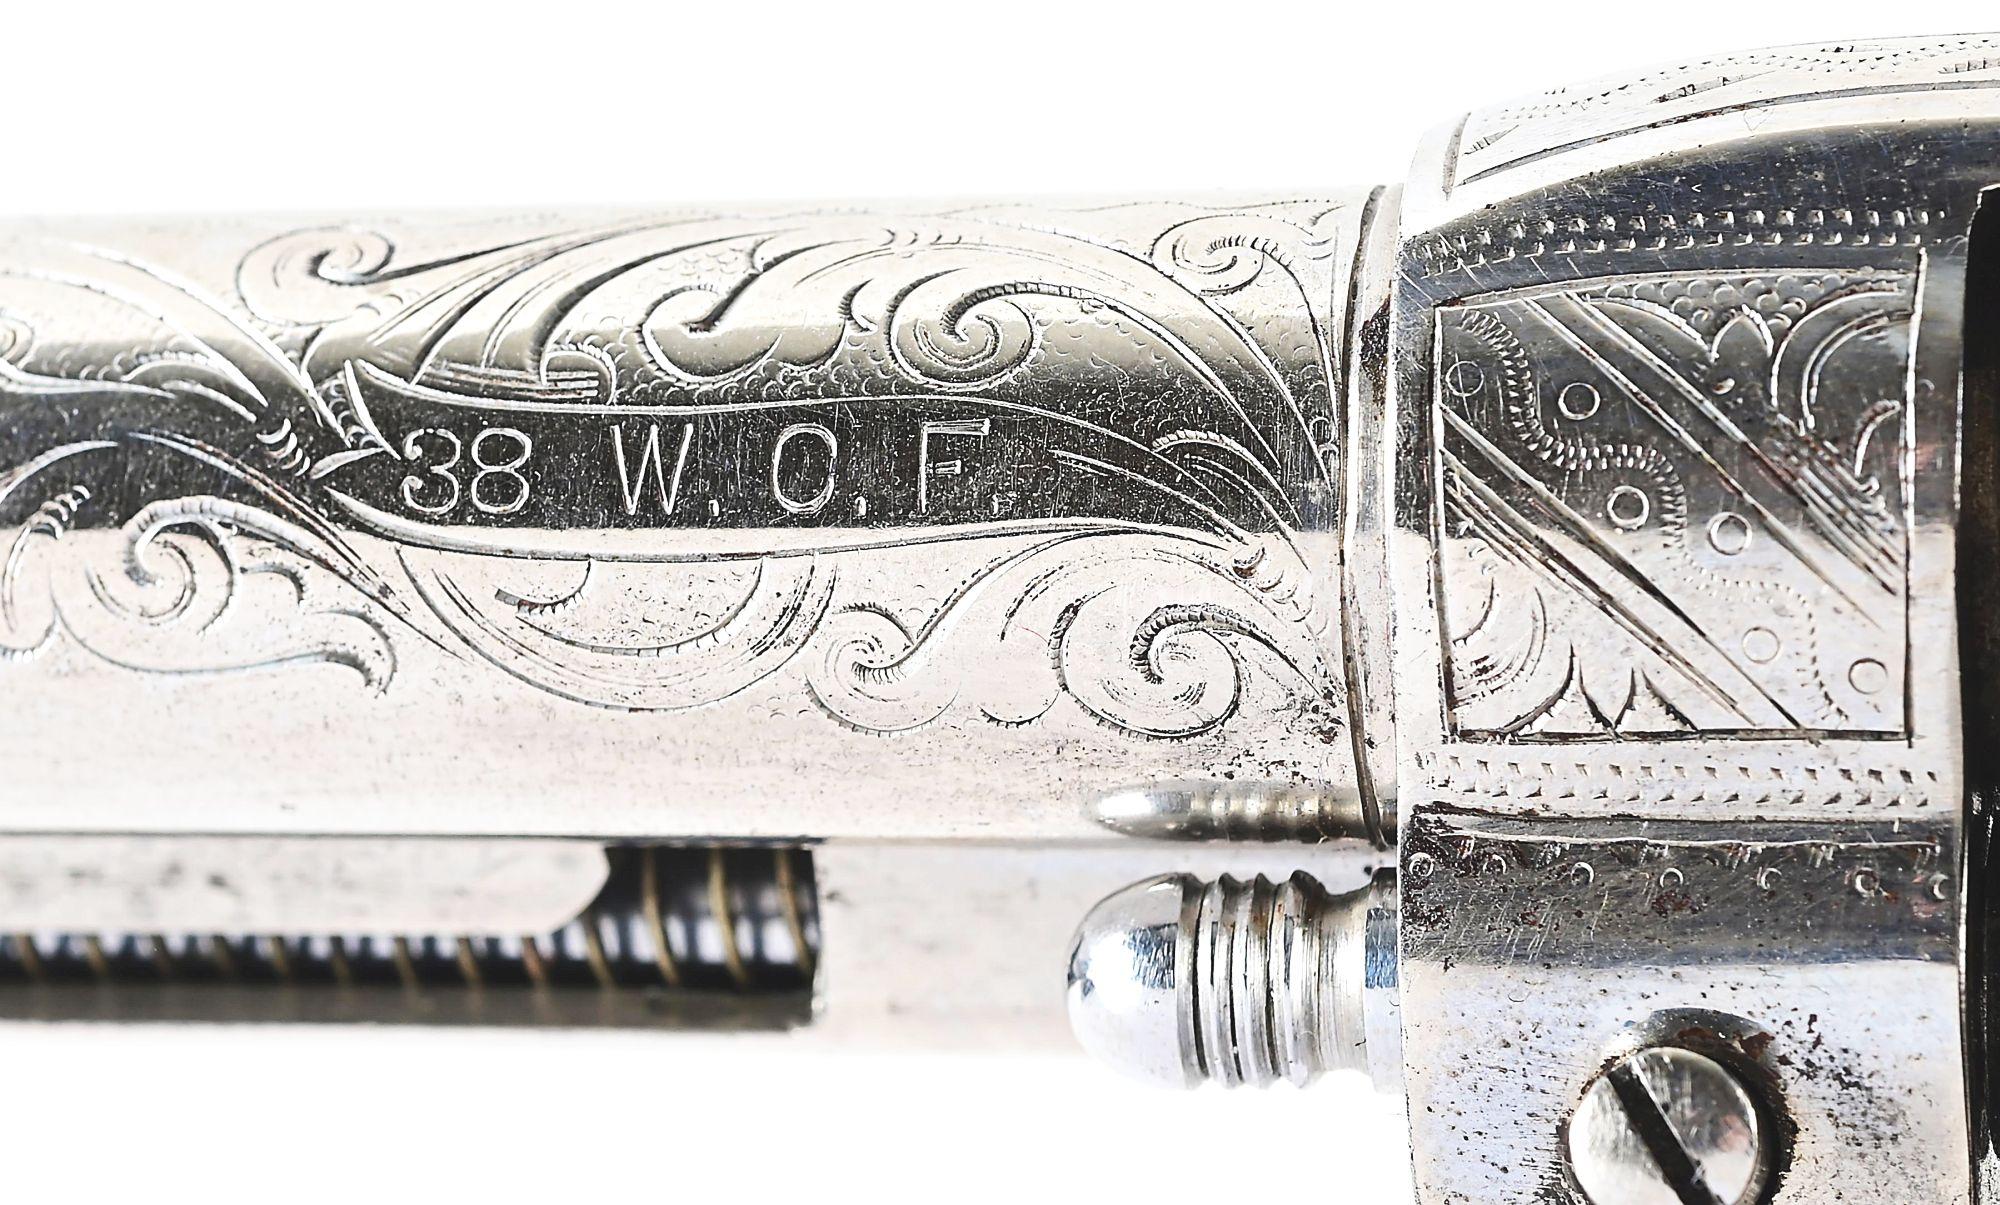 (C) FACTORY ENGRAVED COLT SINGLE ACTION ARMY REVOLVER.